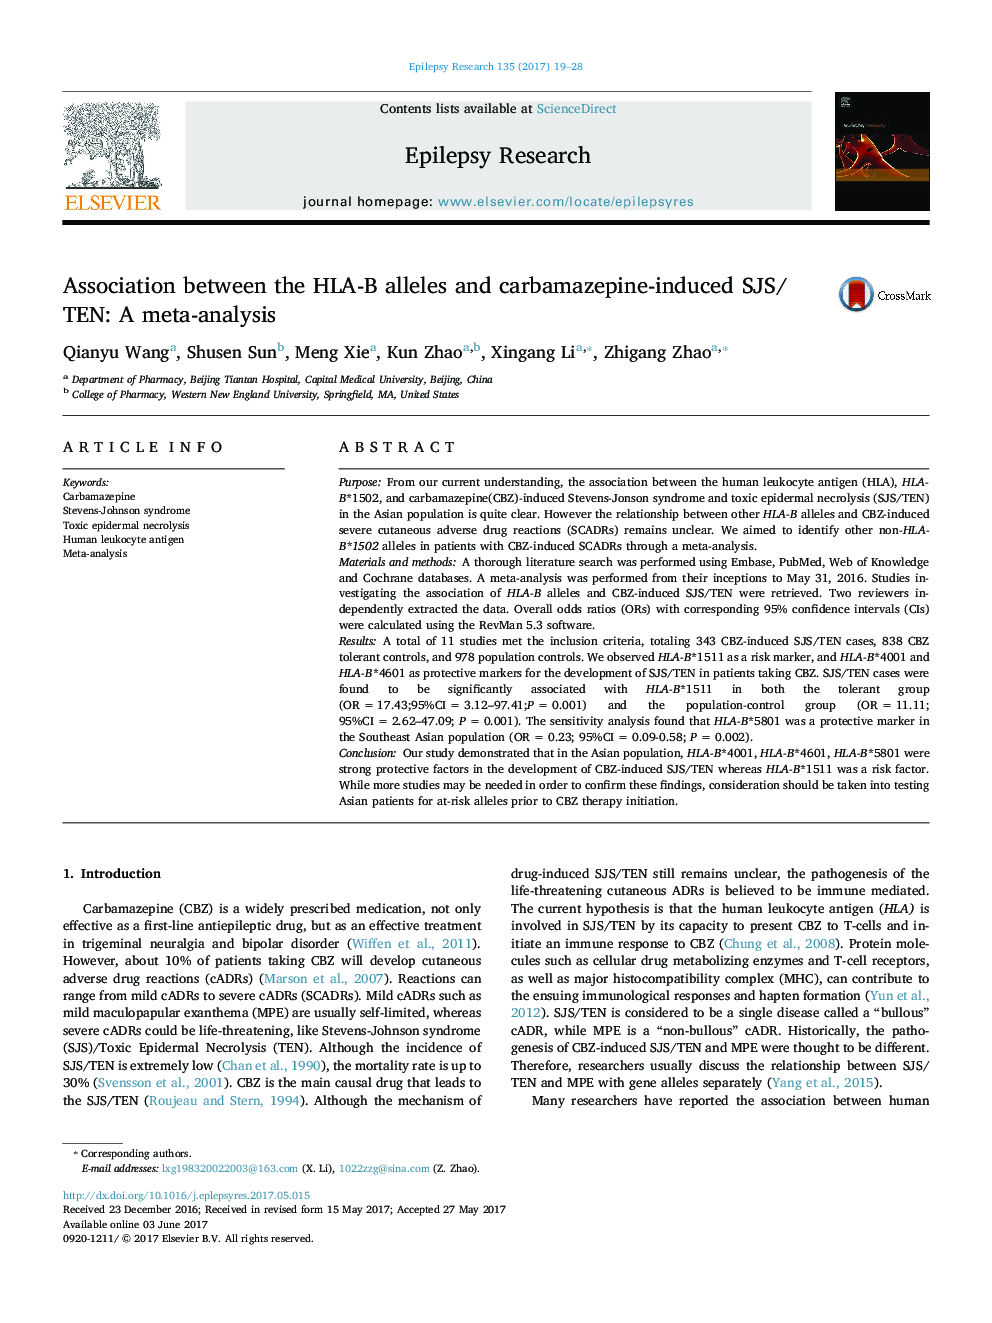 Association between the HLA-B alleles and carbamazepine-induced SJS/TEN: A meta-analysis